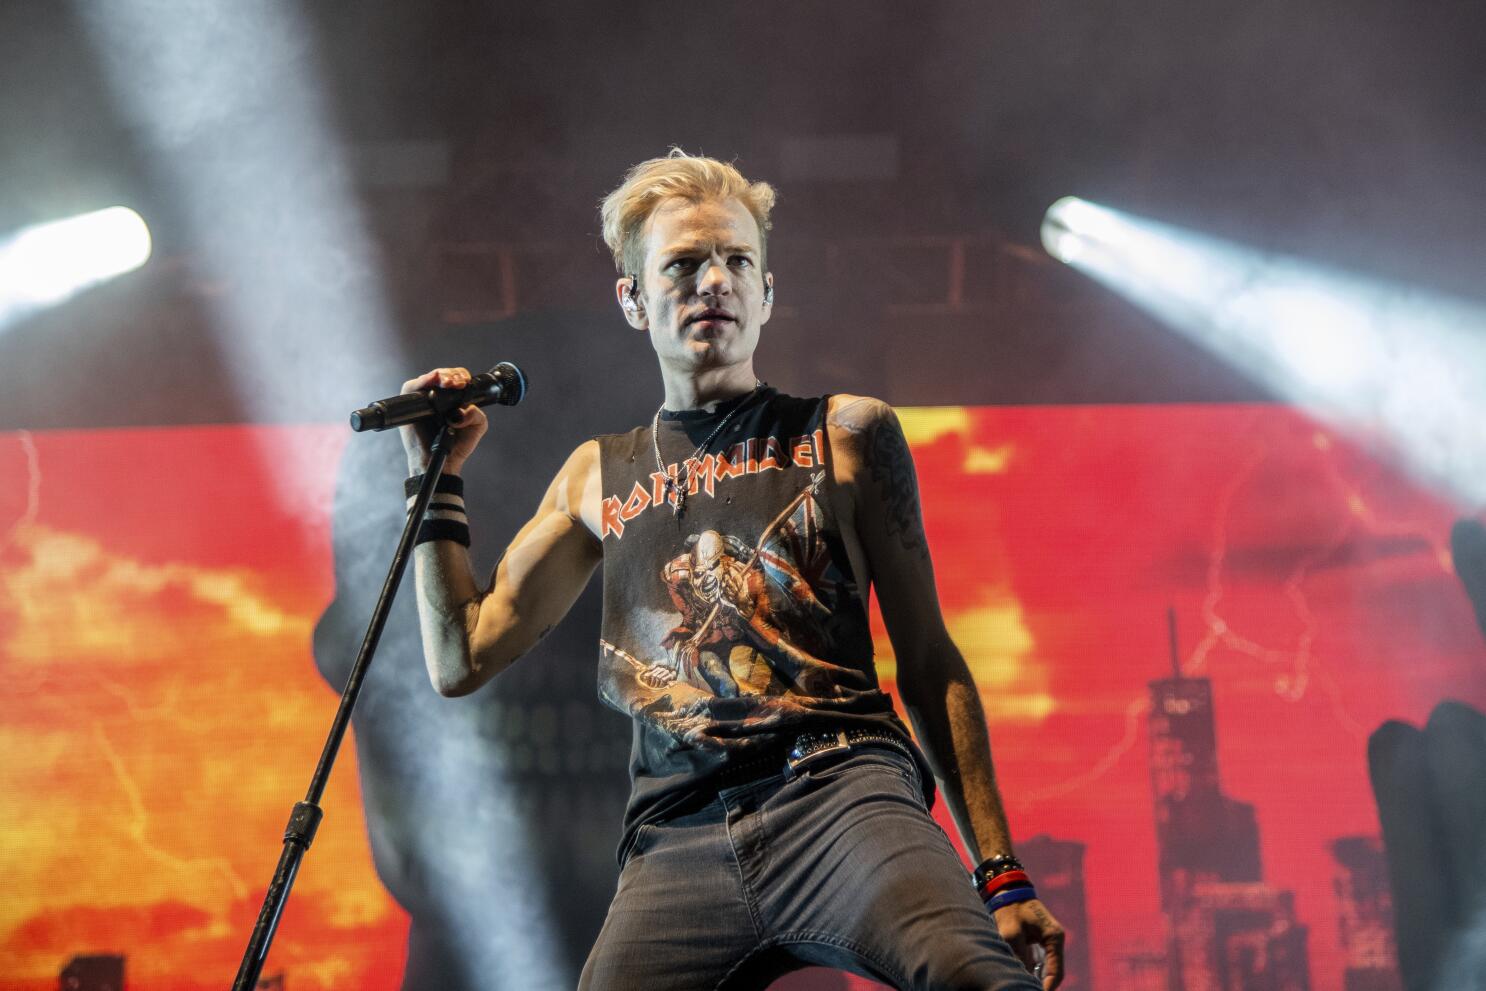 The story and meaning of the song 'Best Of Me - Sum 41 